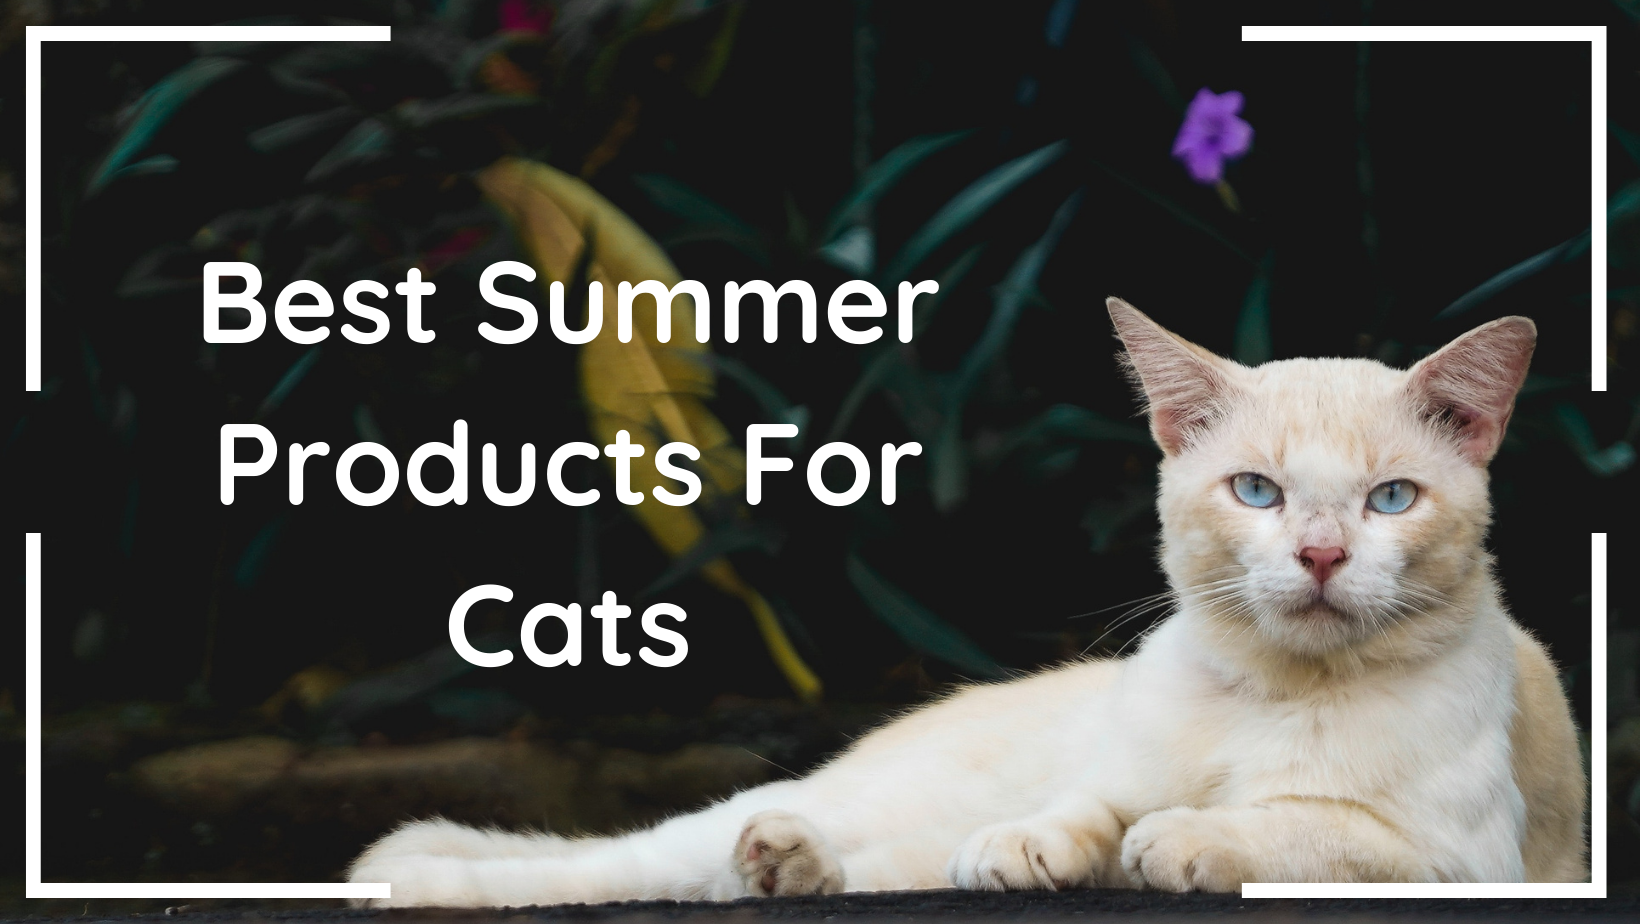 Best Summer Products For Cats